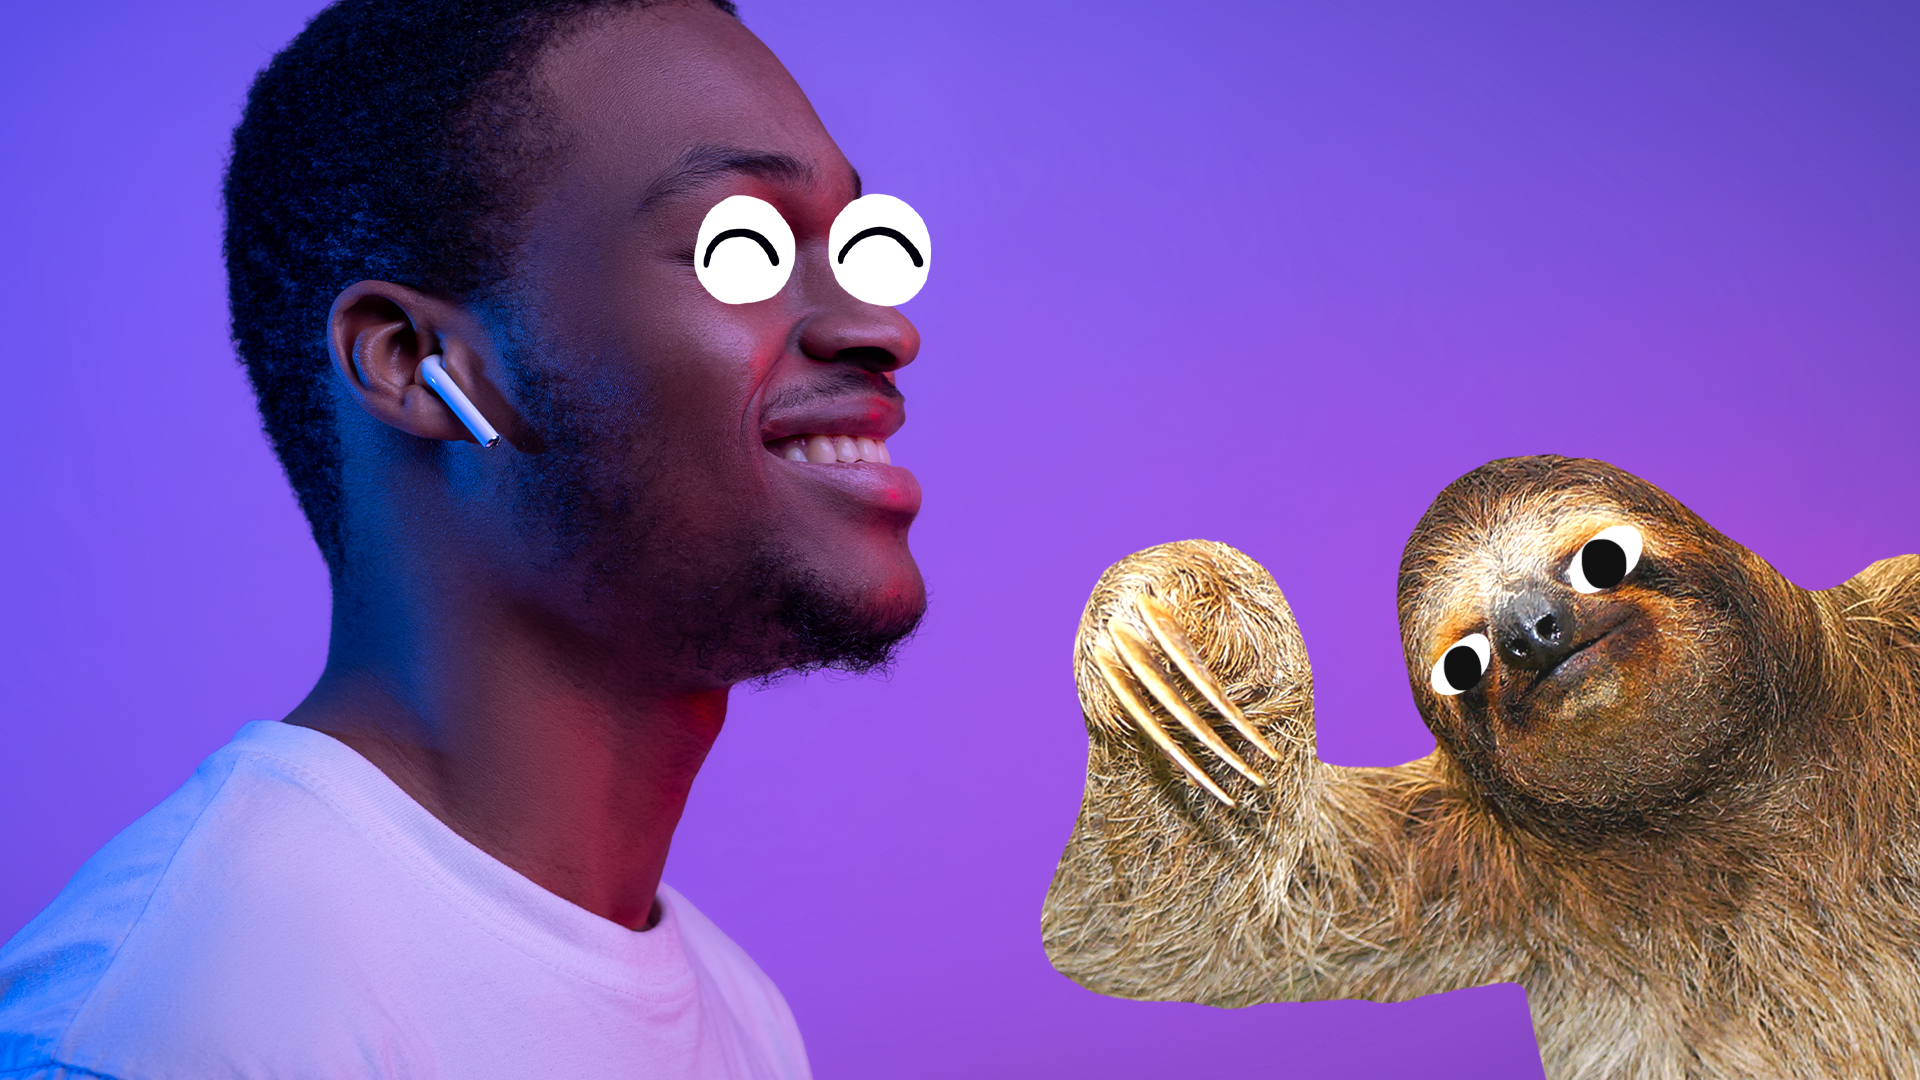 Man with airpods on purple background with derpy sloth 